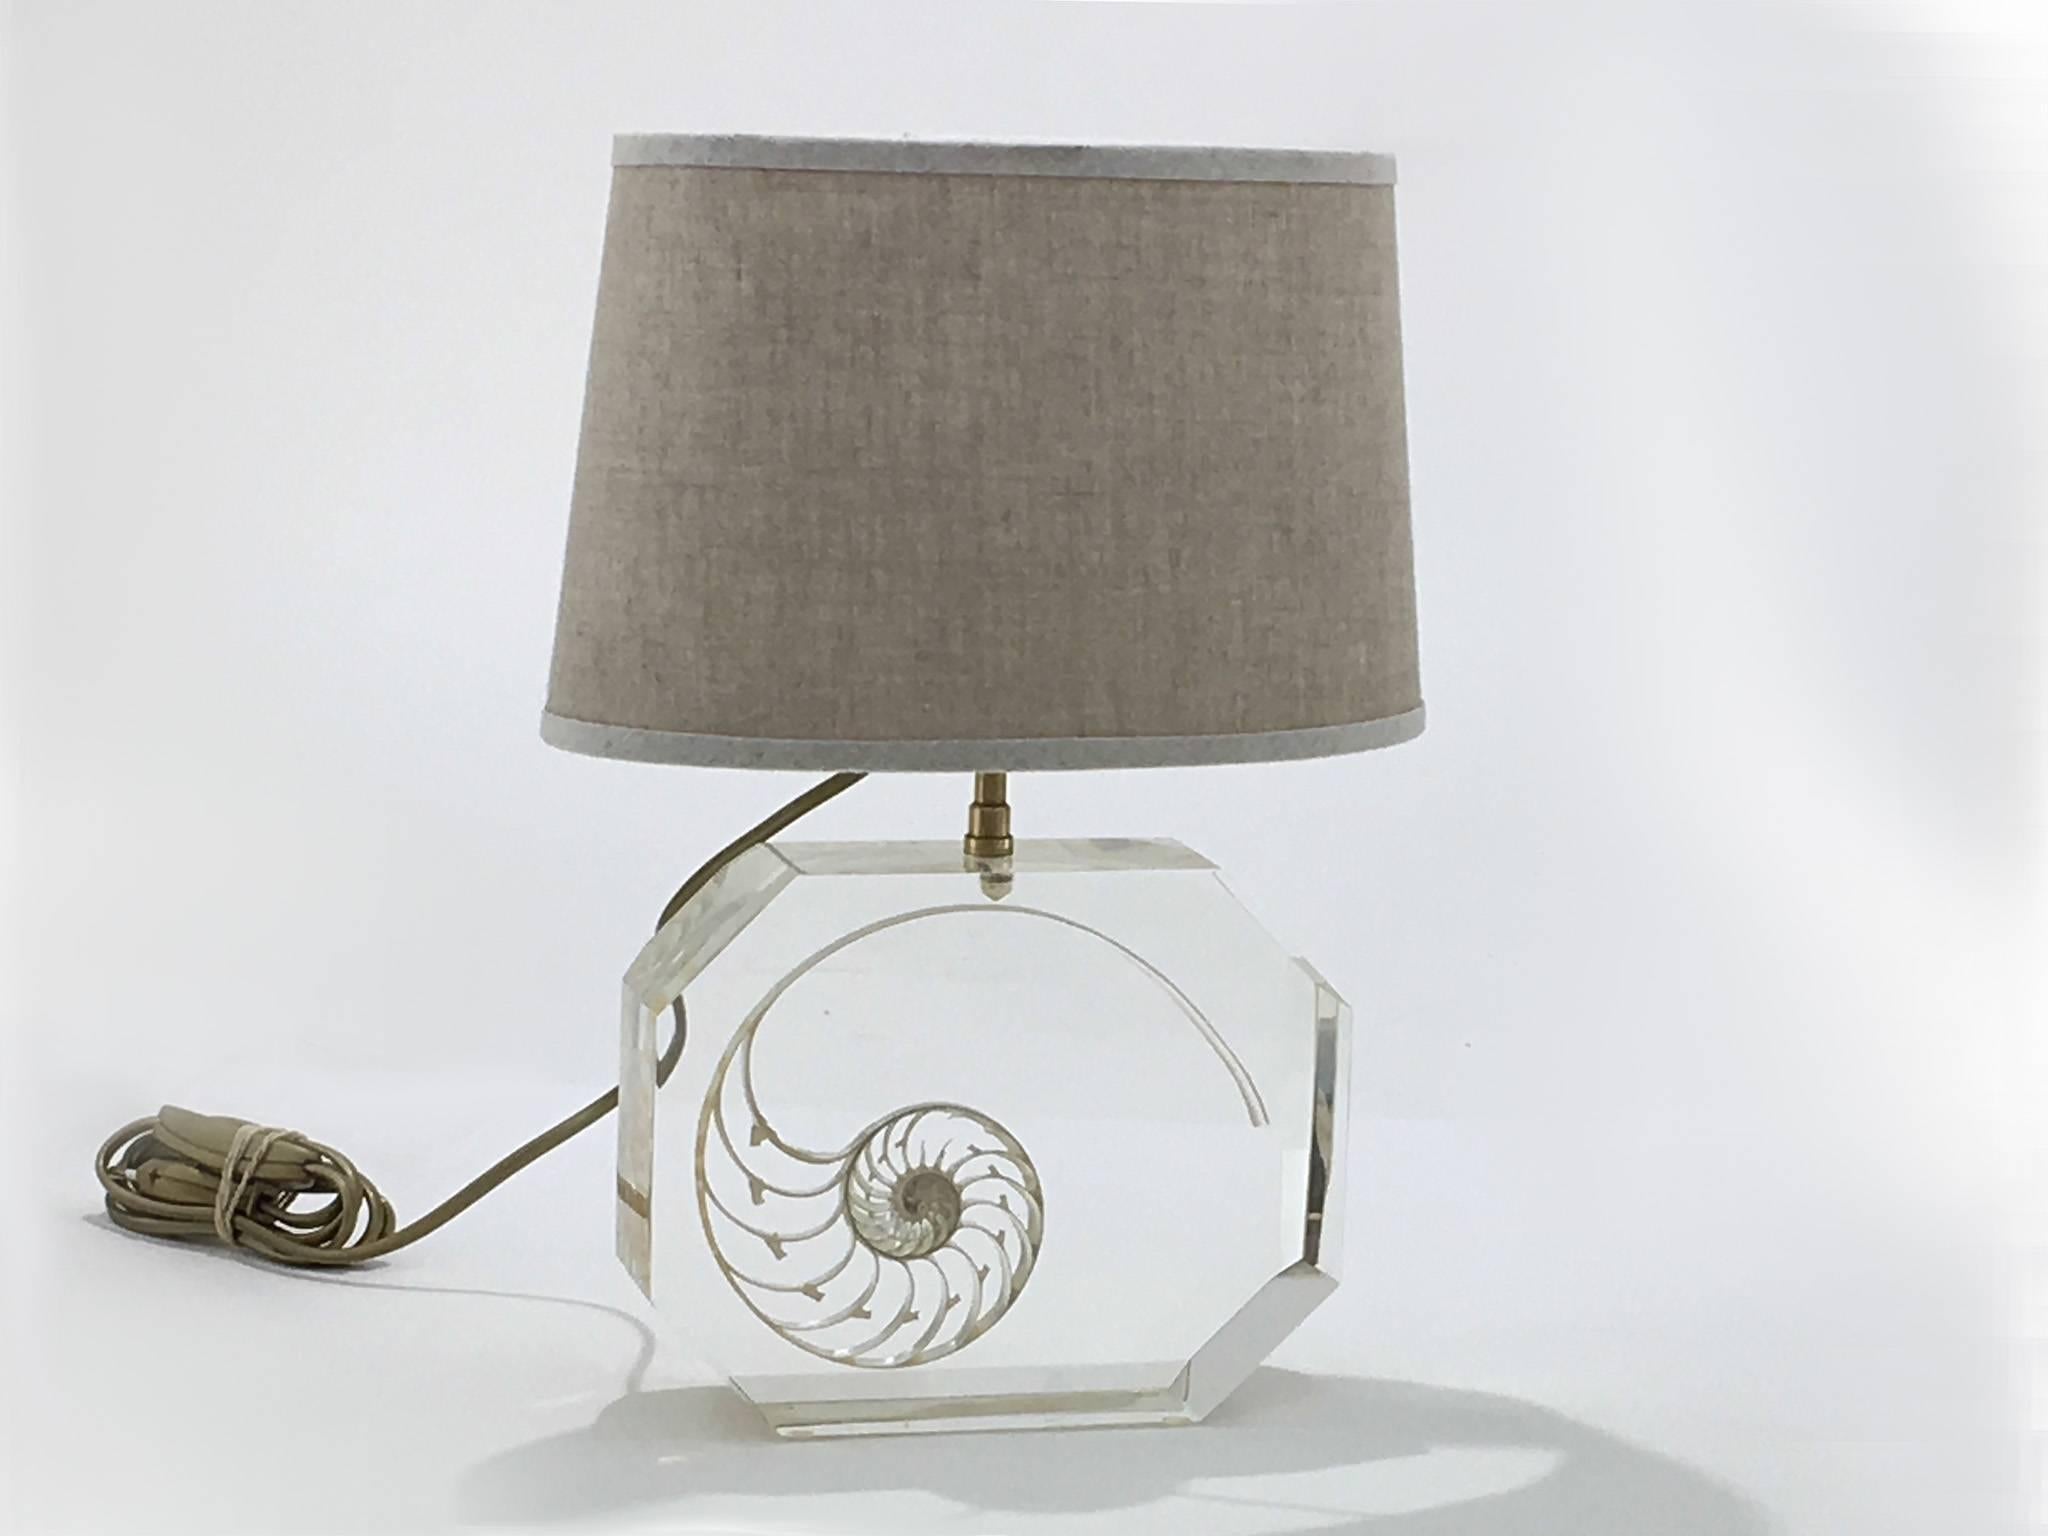 Resin and shell table lamp in the style of Pierre Giraudon, not signed but probably by this Artist.
Dimensions without shade: H 7.87 inches x D 2.75 inches x L 7.87 inches.